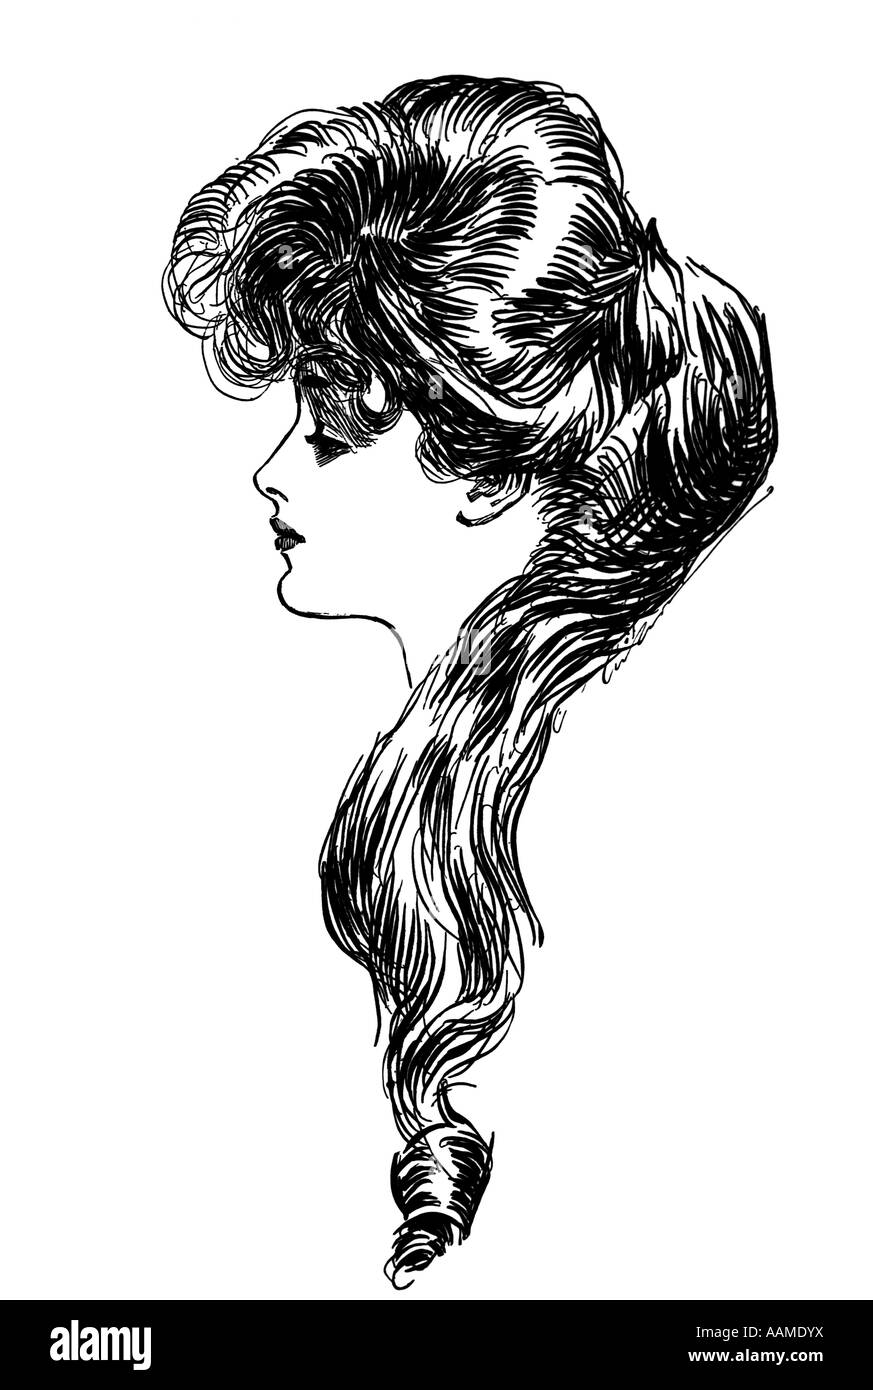 1890s 1900s PROFILE OF SKETCH OF TURN OF THE CENTURY WOMAN WITH HAIR CURLING & CASCADING OVER SHOULDER Stock Photo